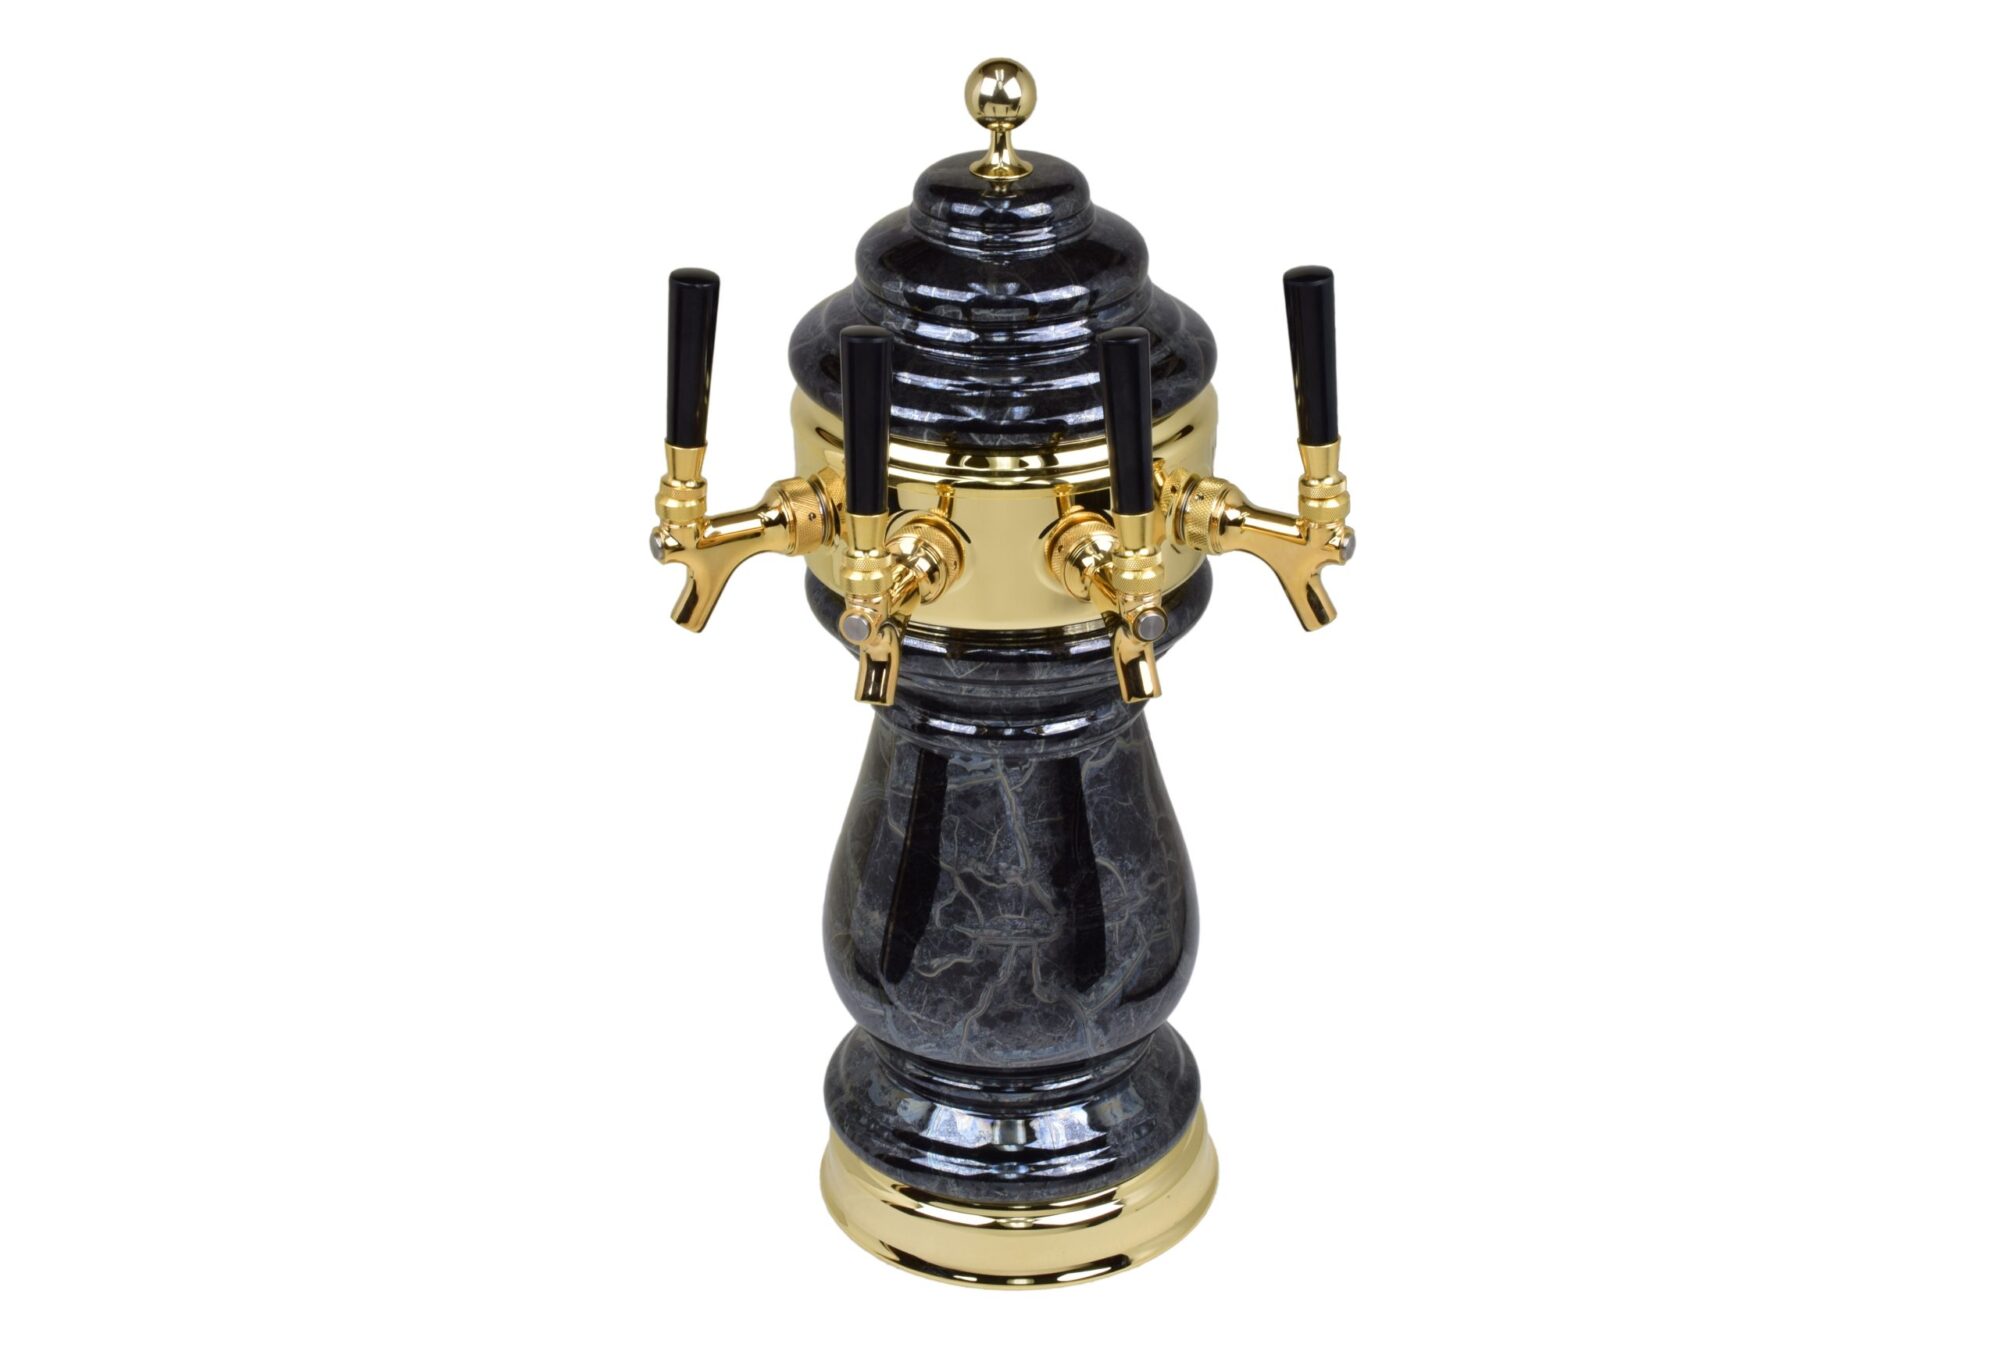 882B-4BM -- Four Faucet Ceramic Tower with PVD Brass Hardware - Available in 5 Colors - Shown in Black Marble